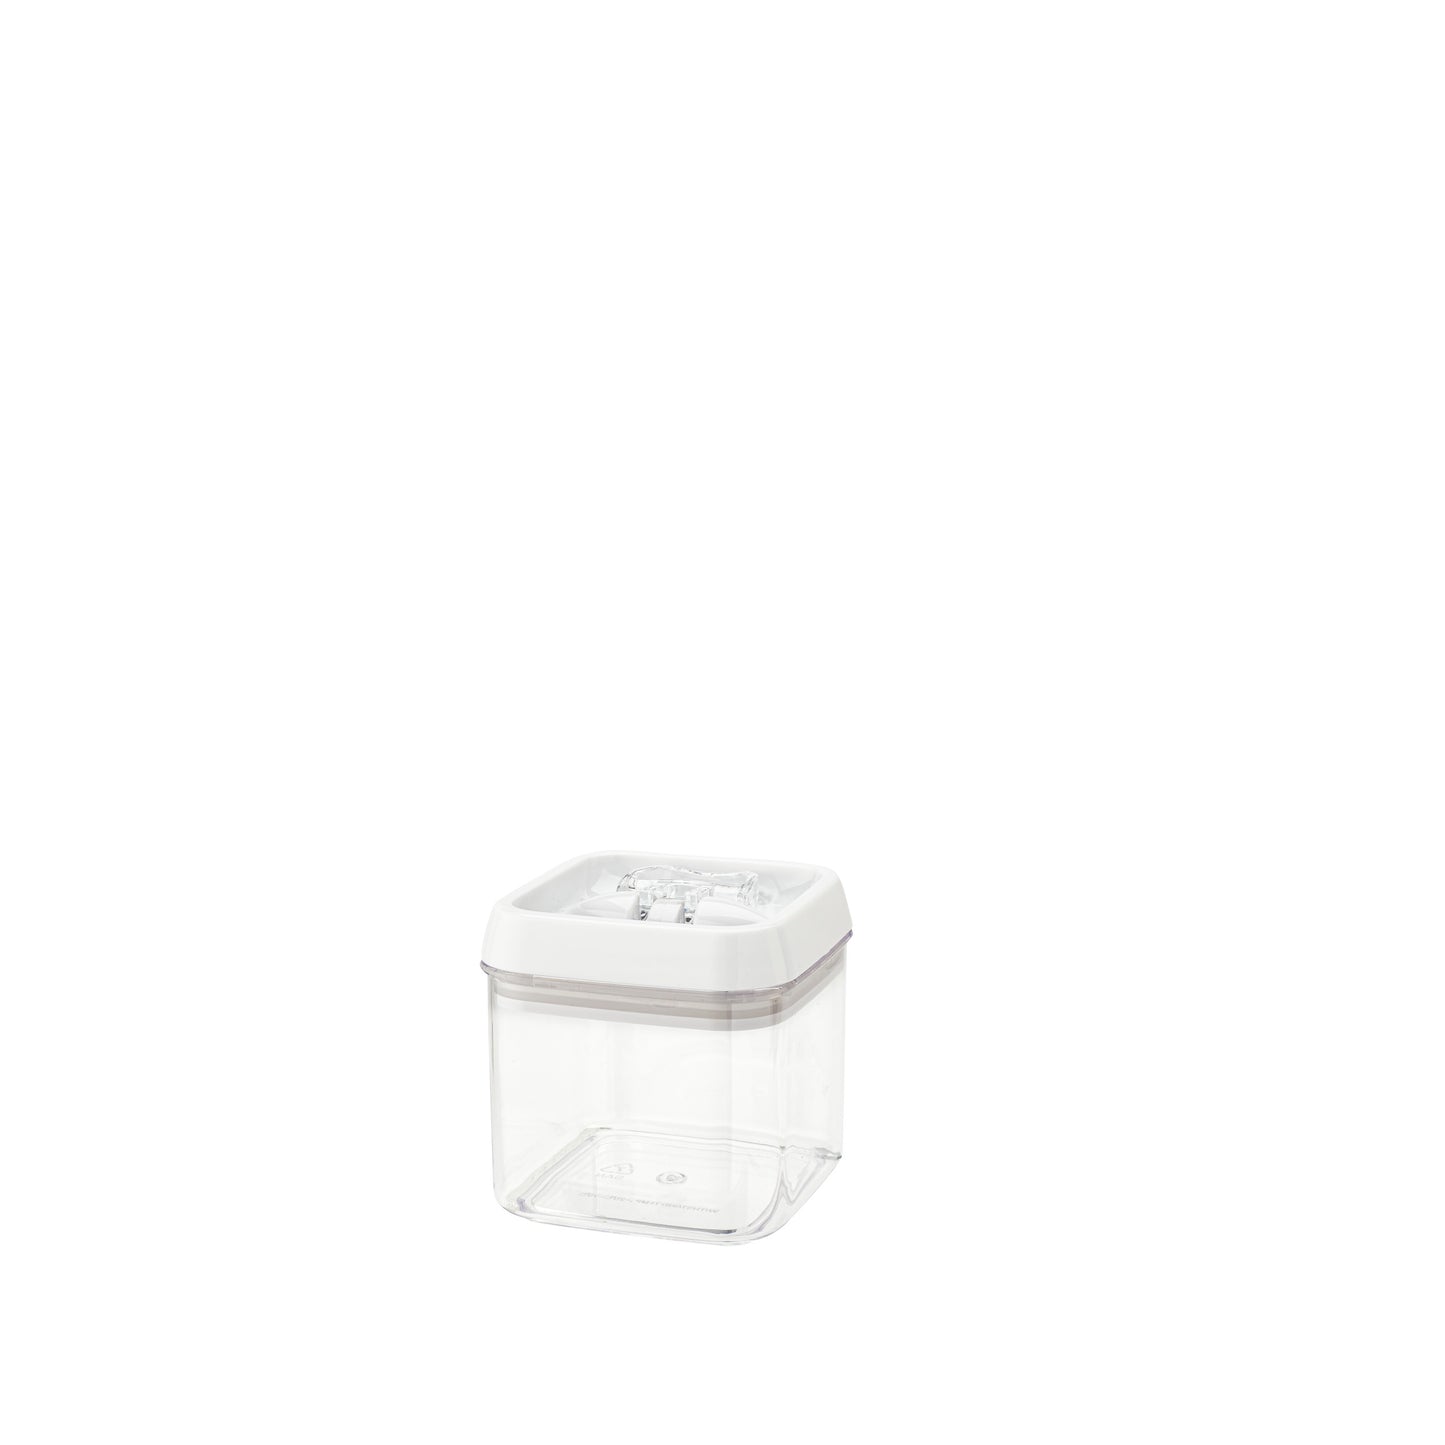 Rev-A-Shelf / CO-03S-1 / Acrylic Container and Matching Lid